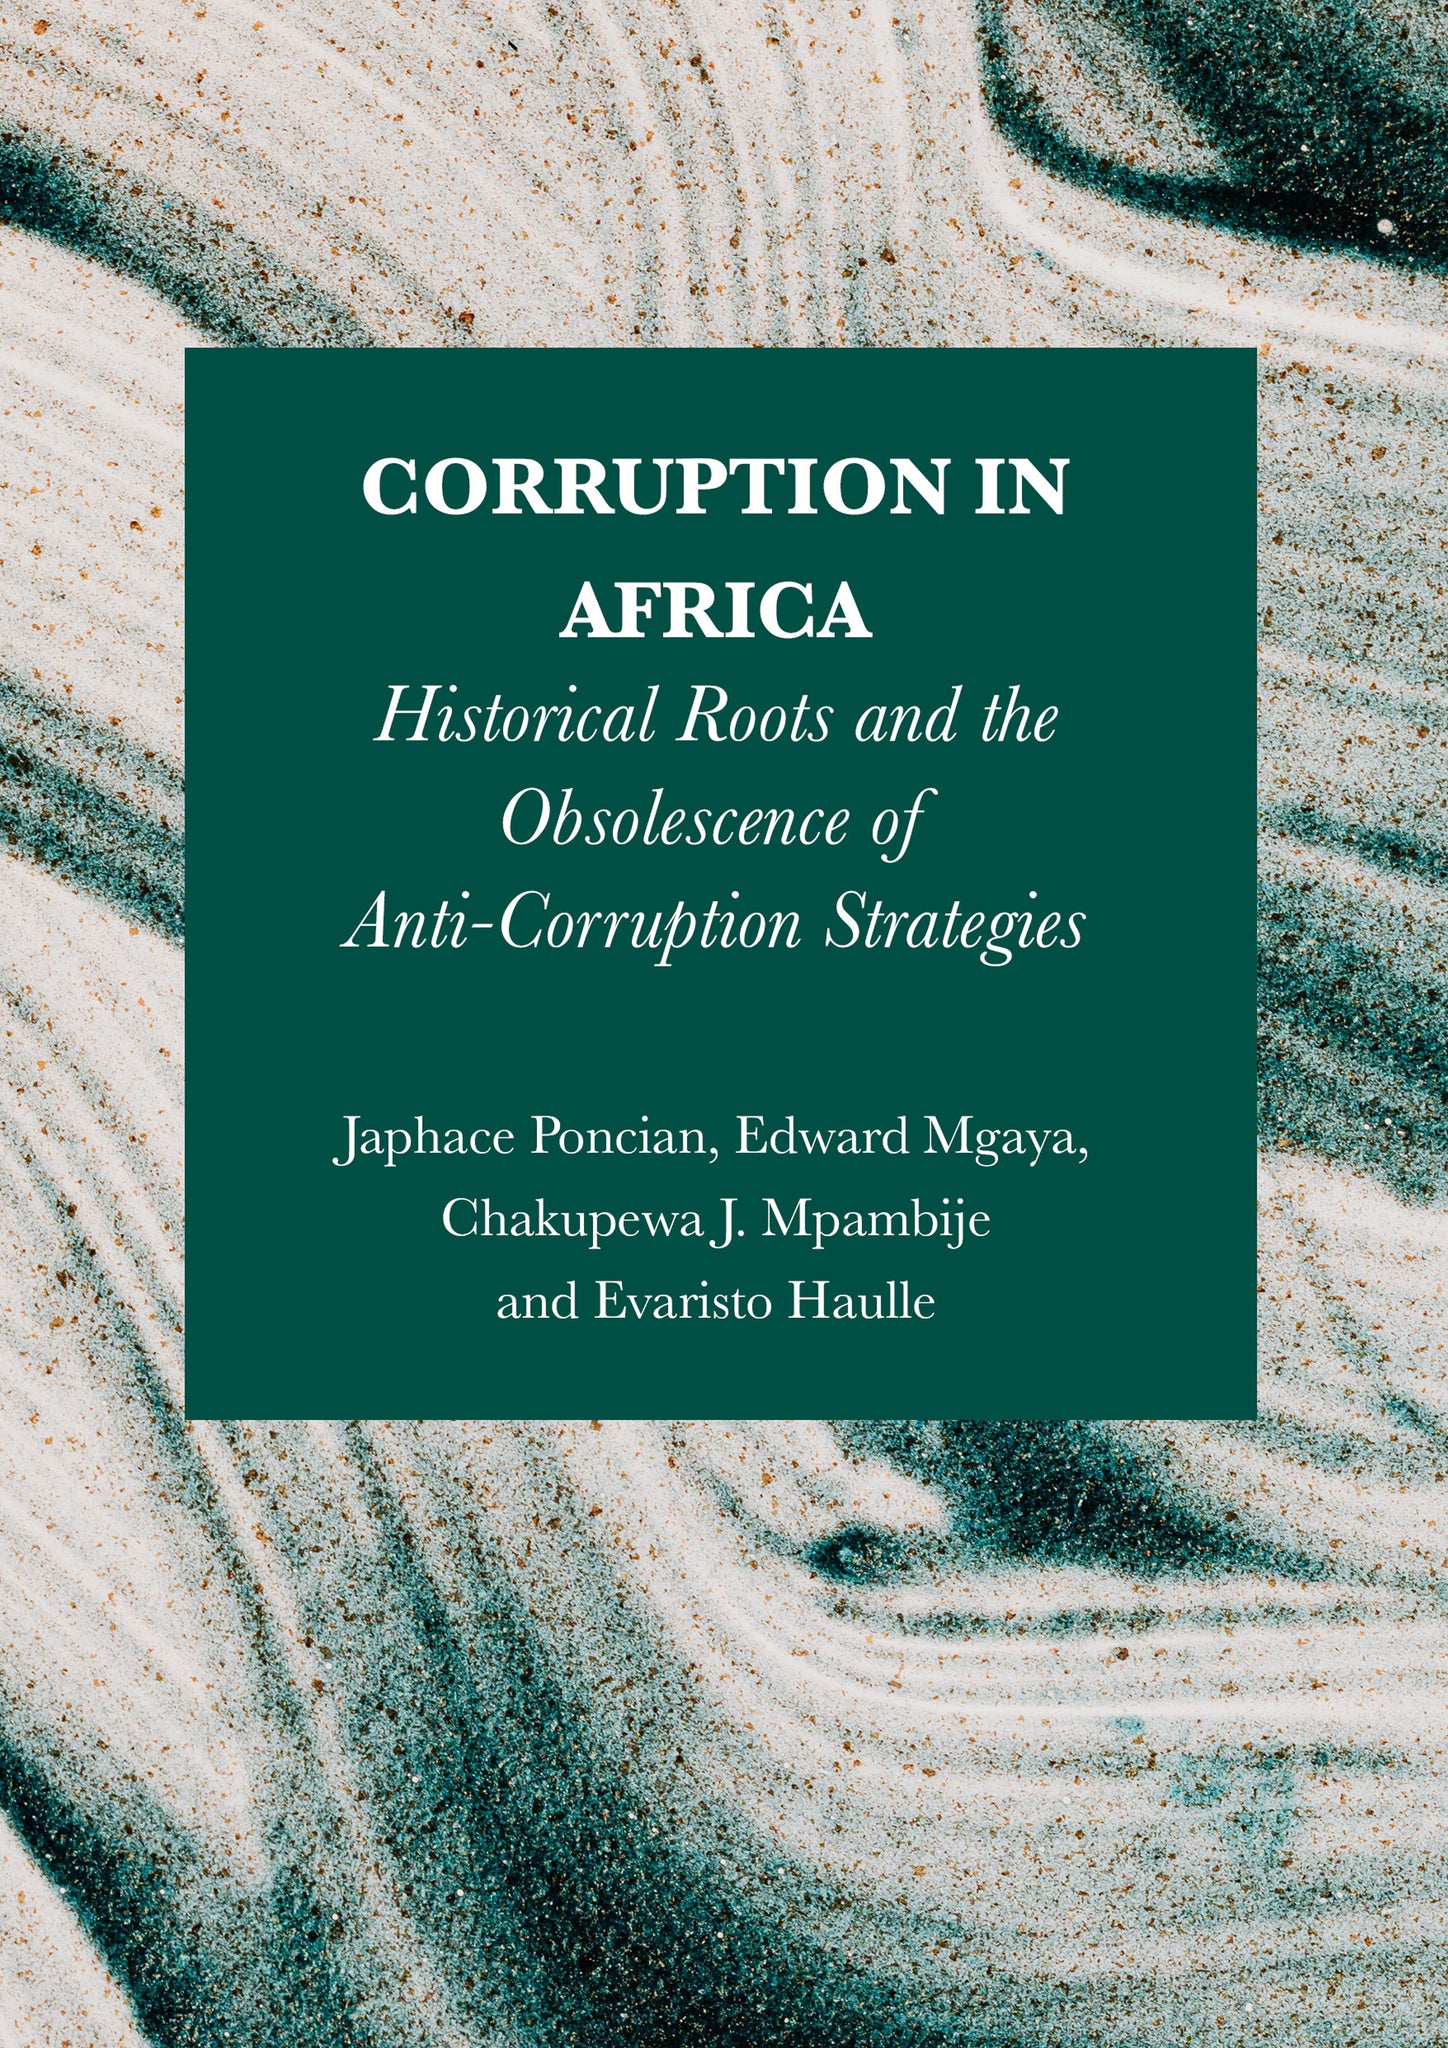 Corruption in Africa: Historical Roots and the Obsolescence of Anti-Corruption Strategies